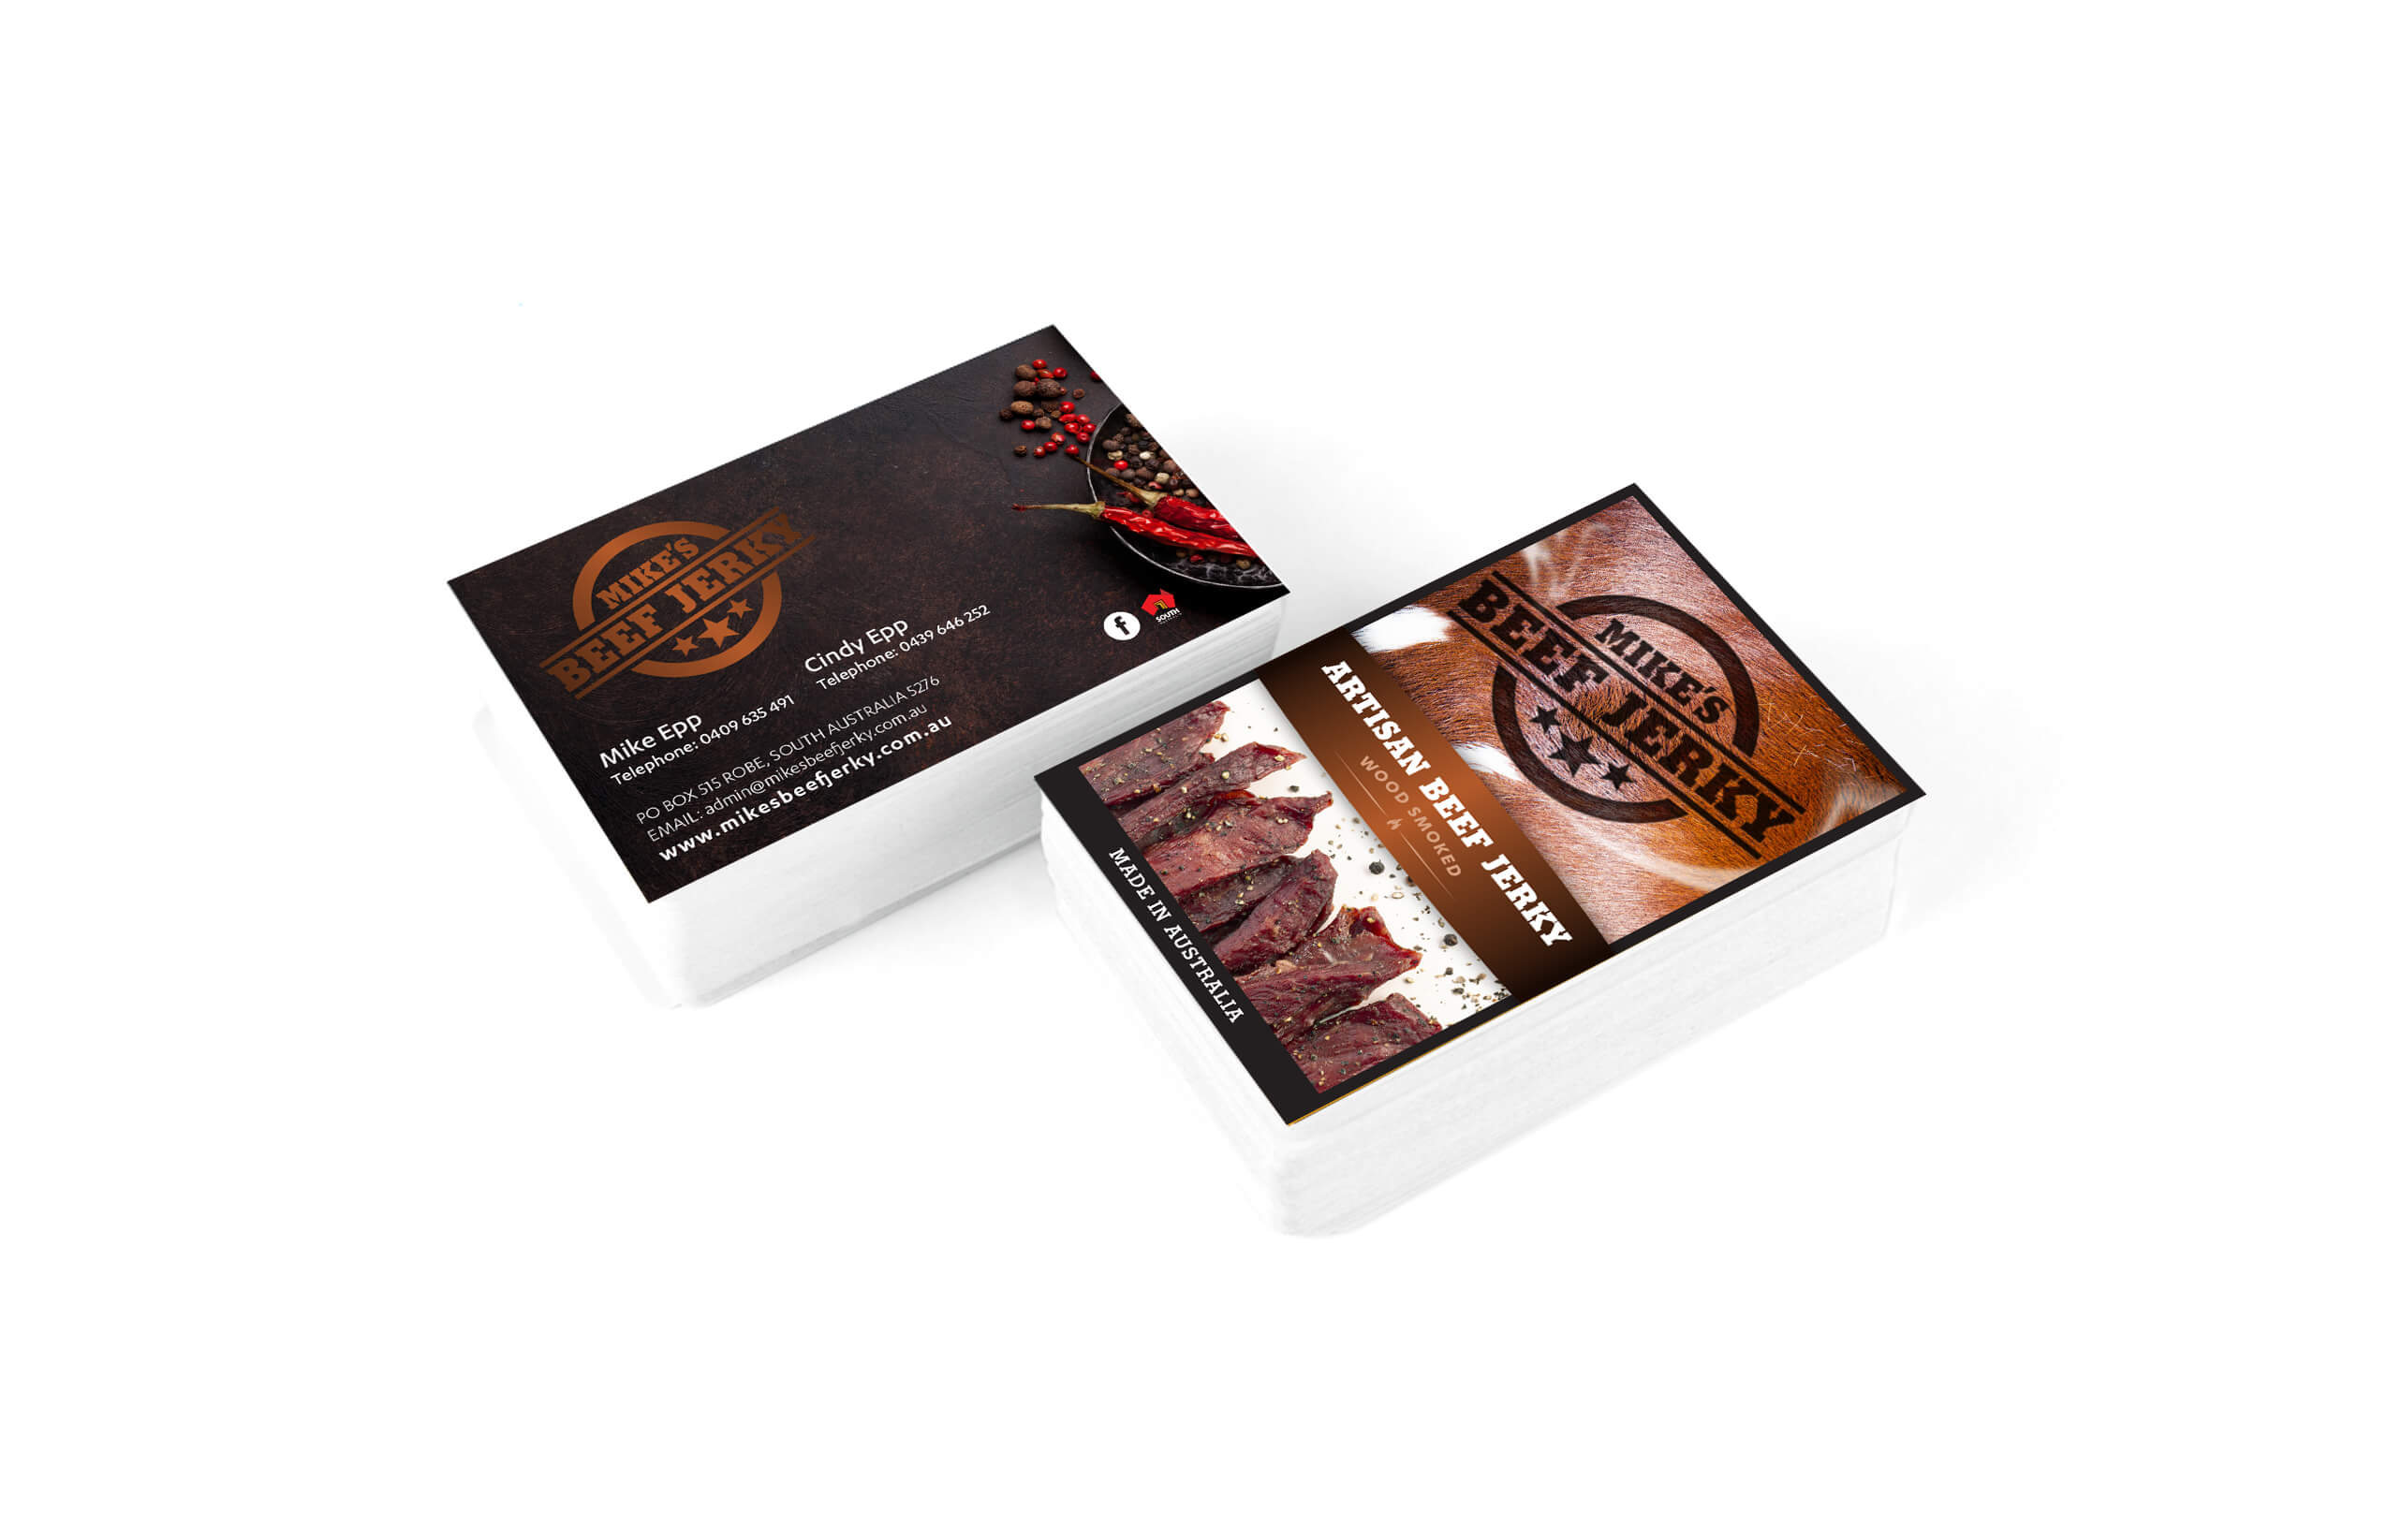 Icon Web Design Adelaide. Image of Mike's Beef Jerky business cards in a vertical stack.